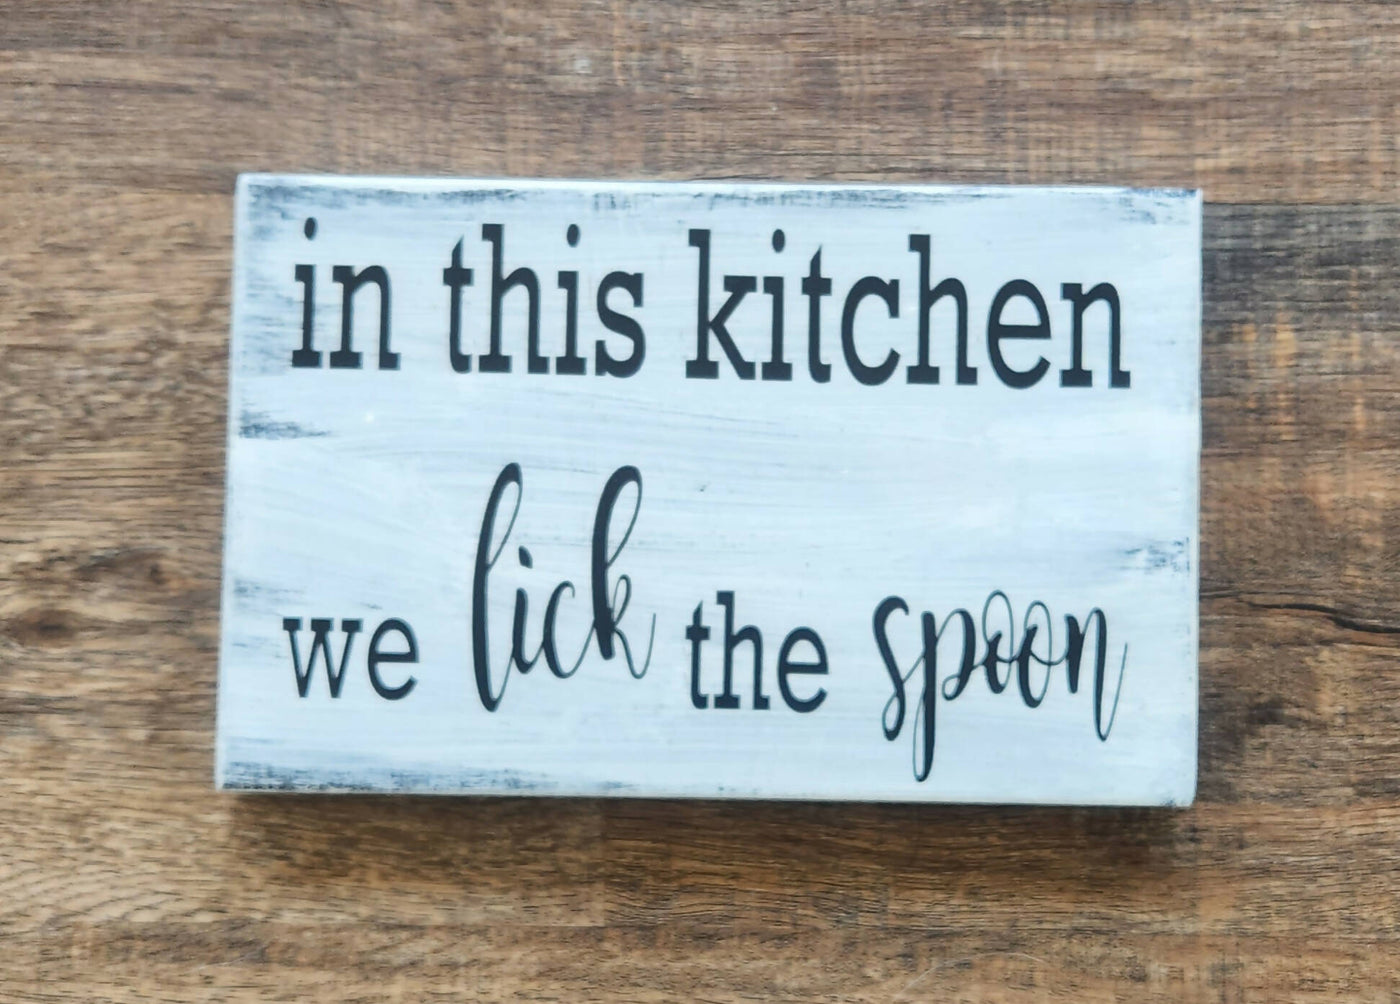 Kitchen Sign In this kitchen we lick the spoon.